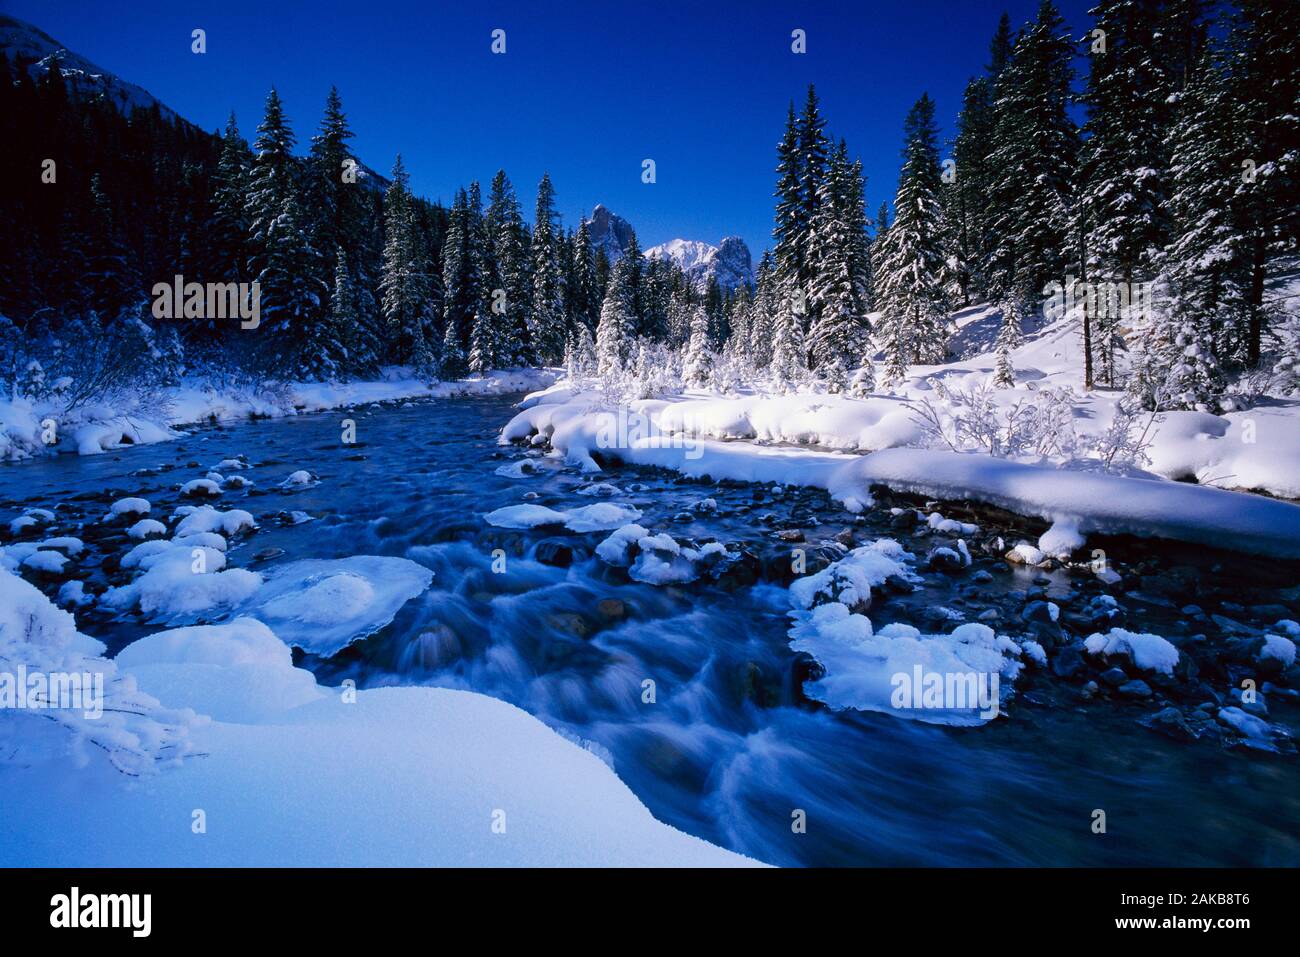 Landscape with river and evergreen trees in winter, Banff National Park, Alberta, Canada Stock Photo